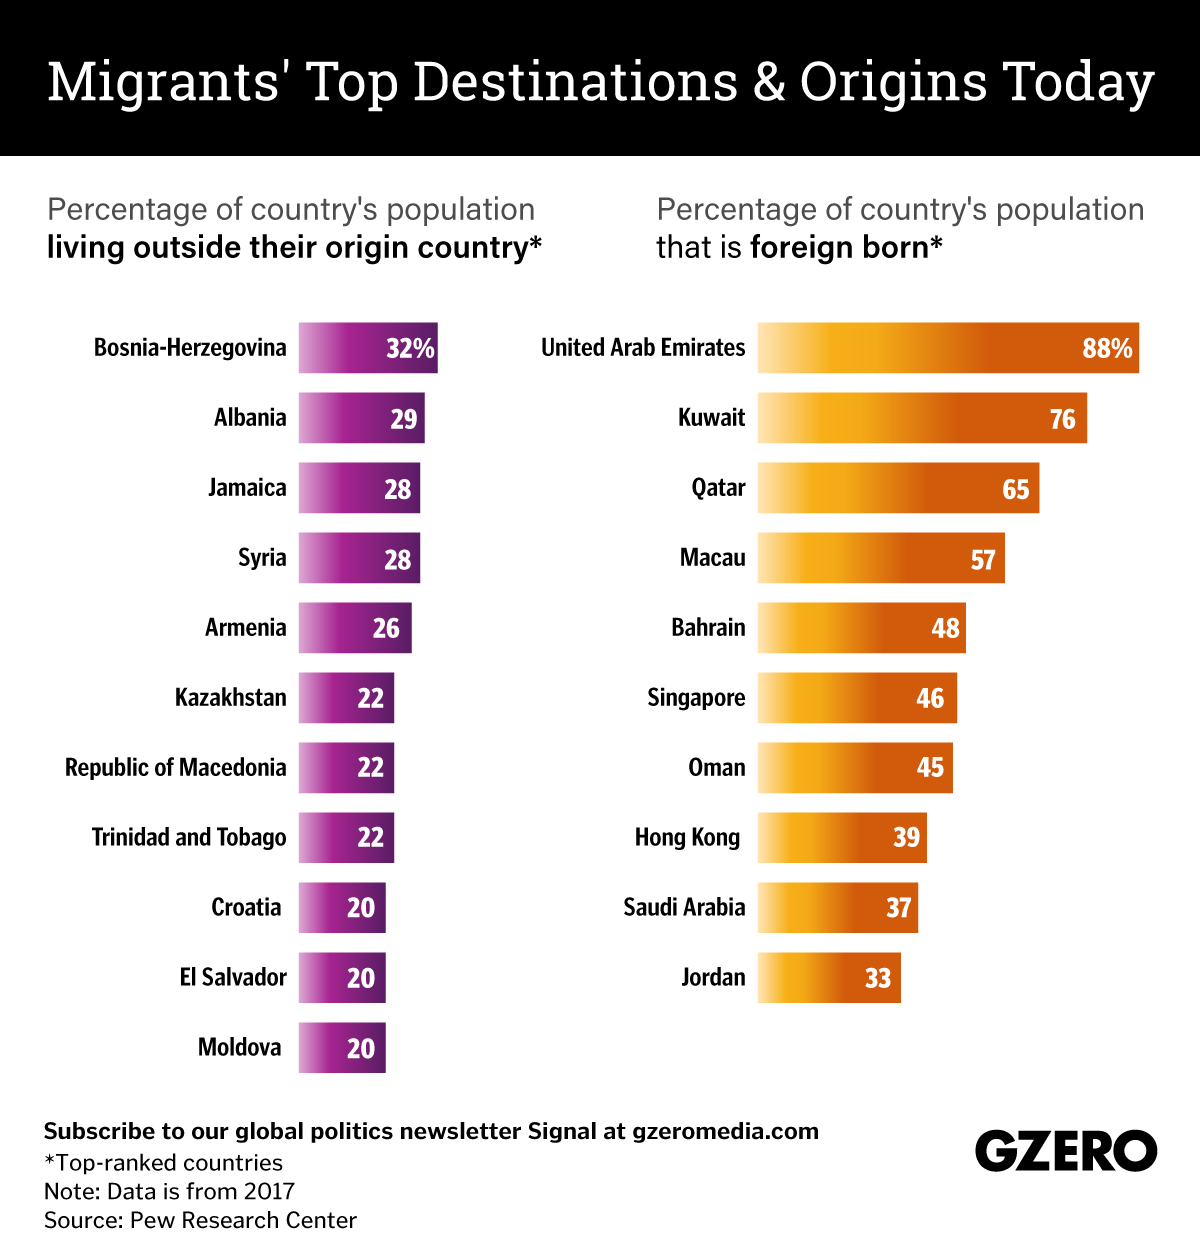 The Graphic Truth: Migrants' top destinations and origins